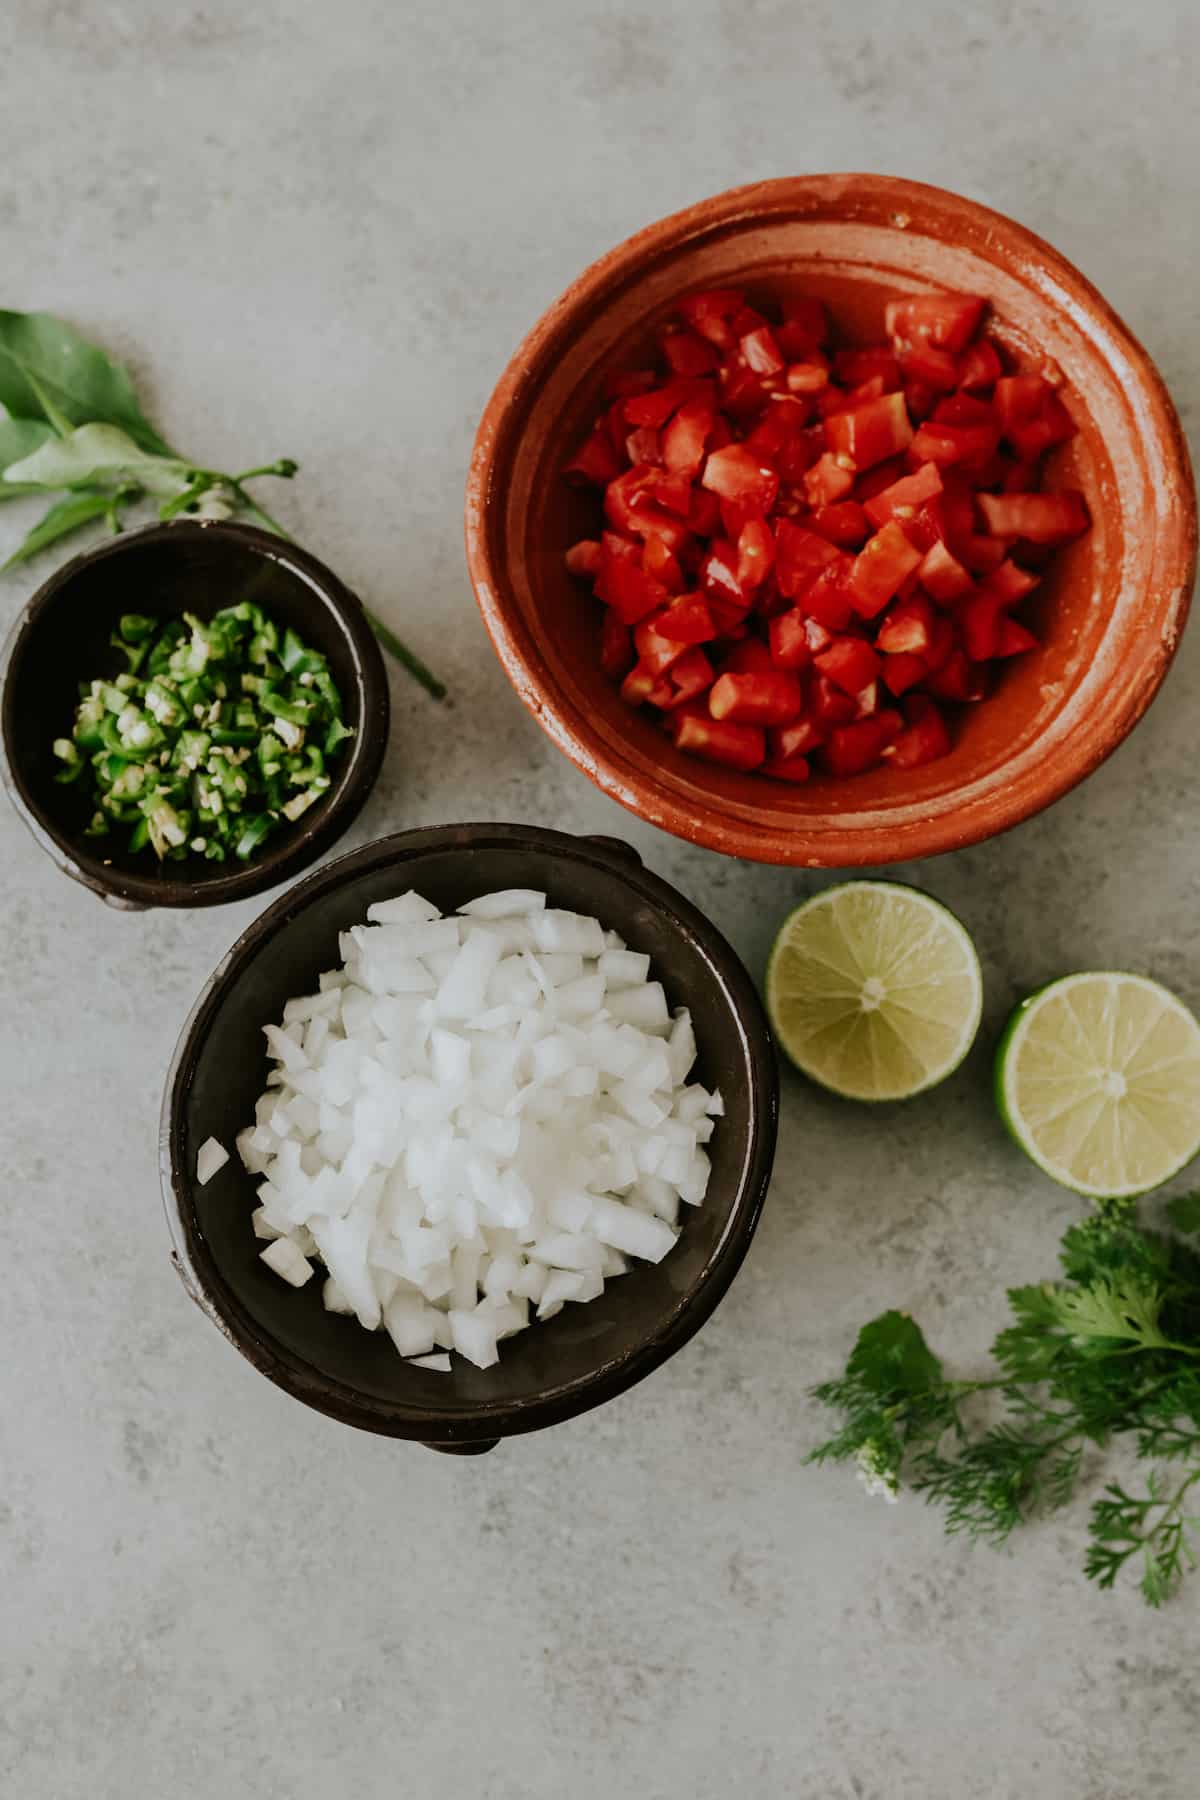 Finely chopped tomato salad ingredients in separate bowls on a grey background, including tomatoes, green peppers, and white onion, as well as lime wedges and fresh cilantro